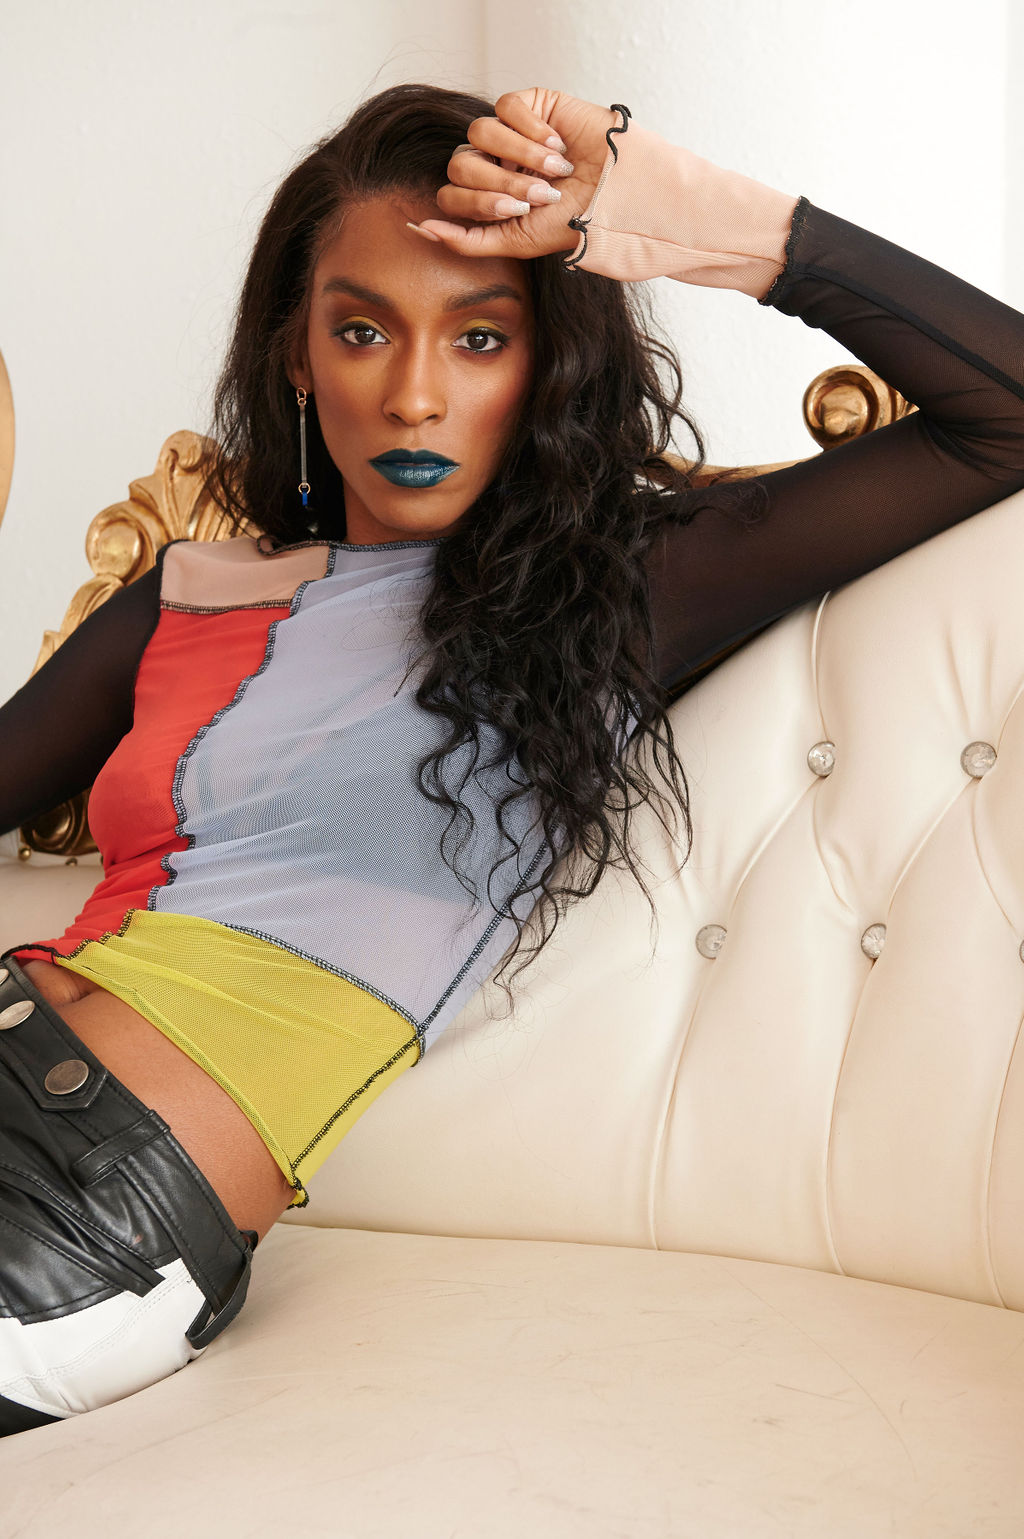 Annju'lia Smalls in Zadig&Voltaire-reaching hand-sheldon botler photography-color blocking-wear who you are-blue lipstick